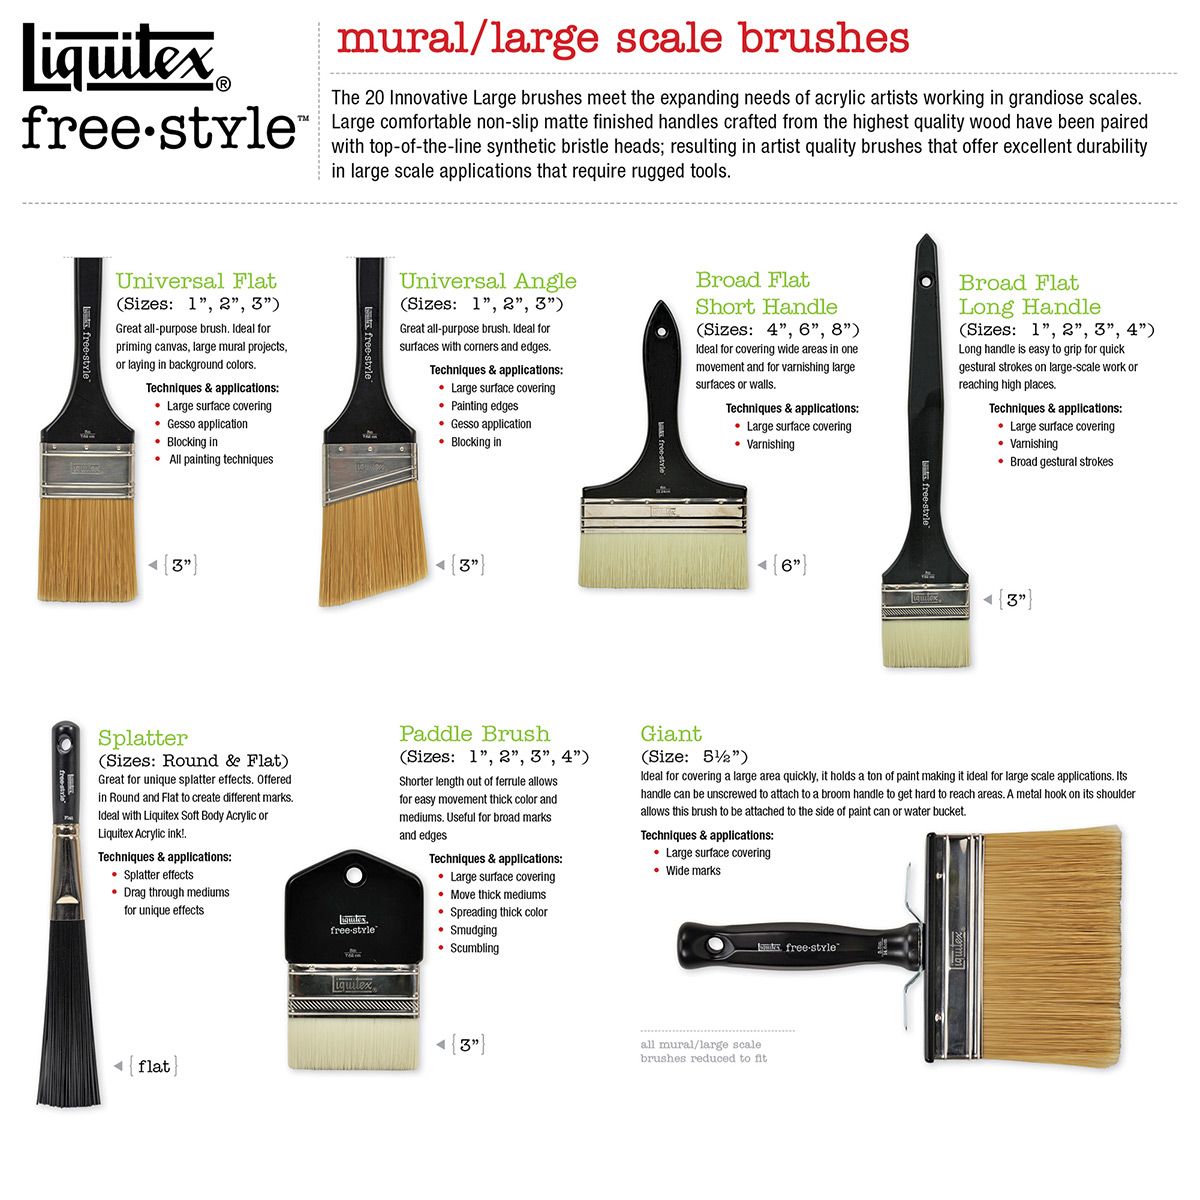 An innovative range of professional brushes for traditional and modern artistic expression!